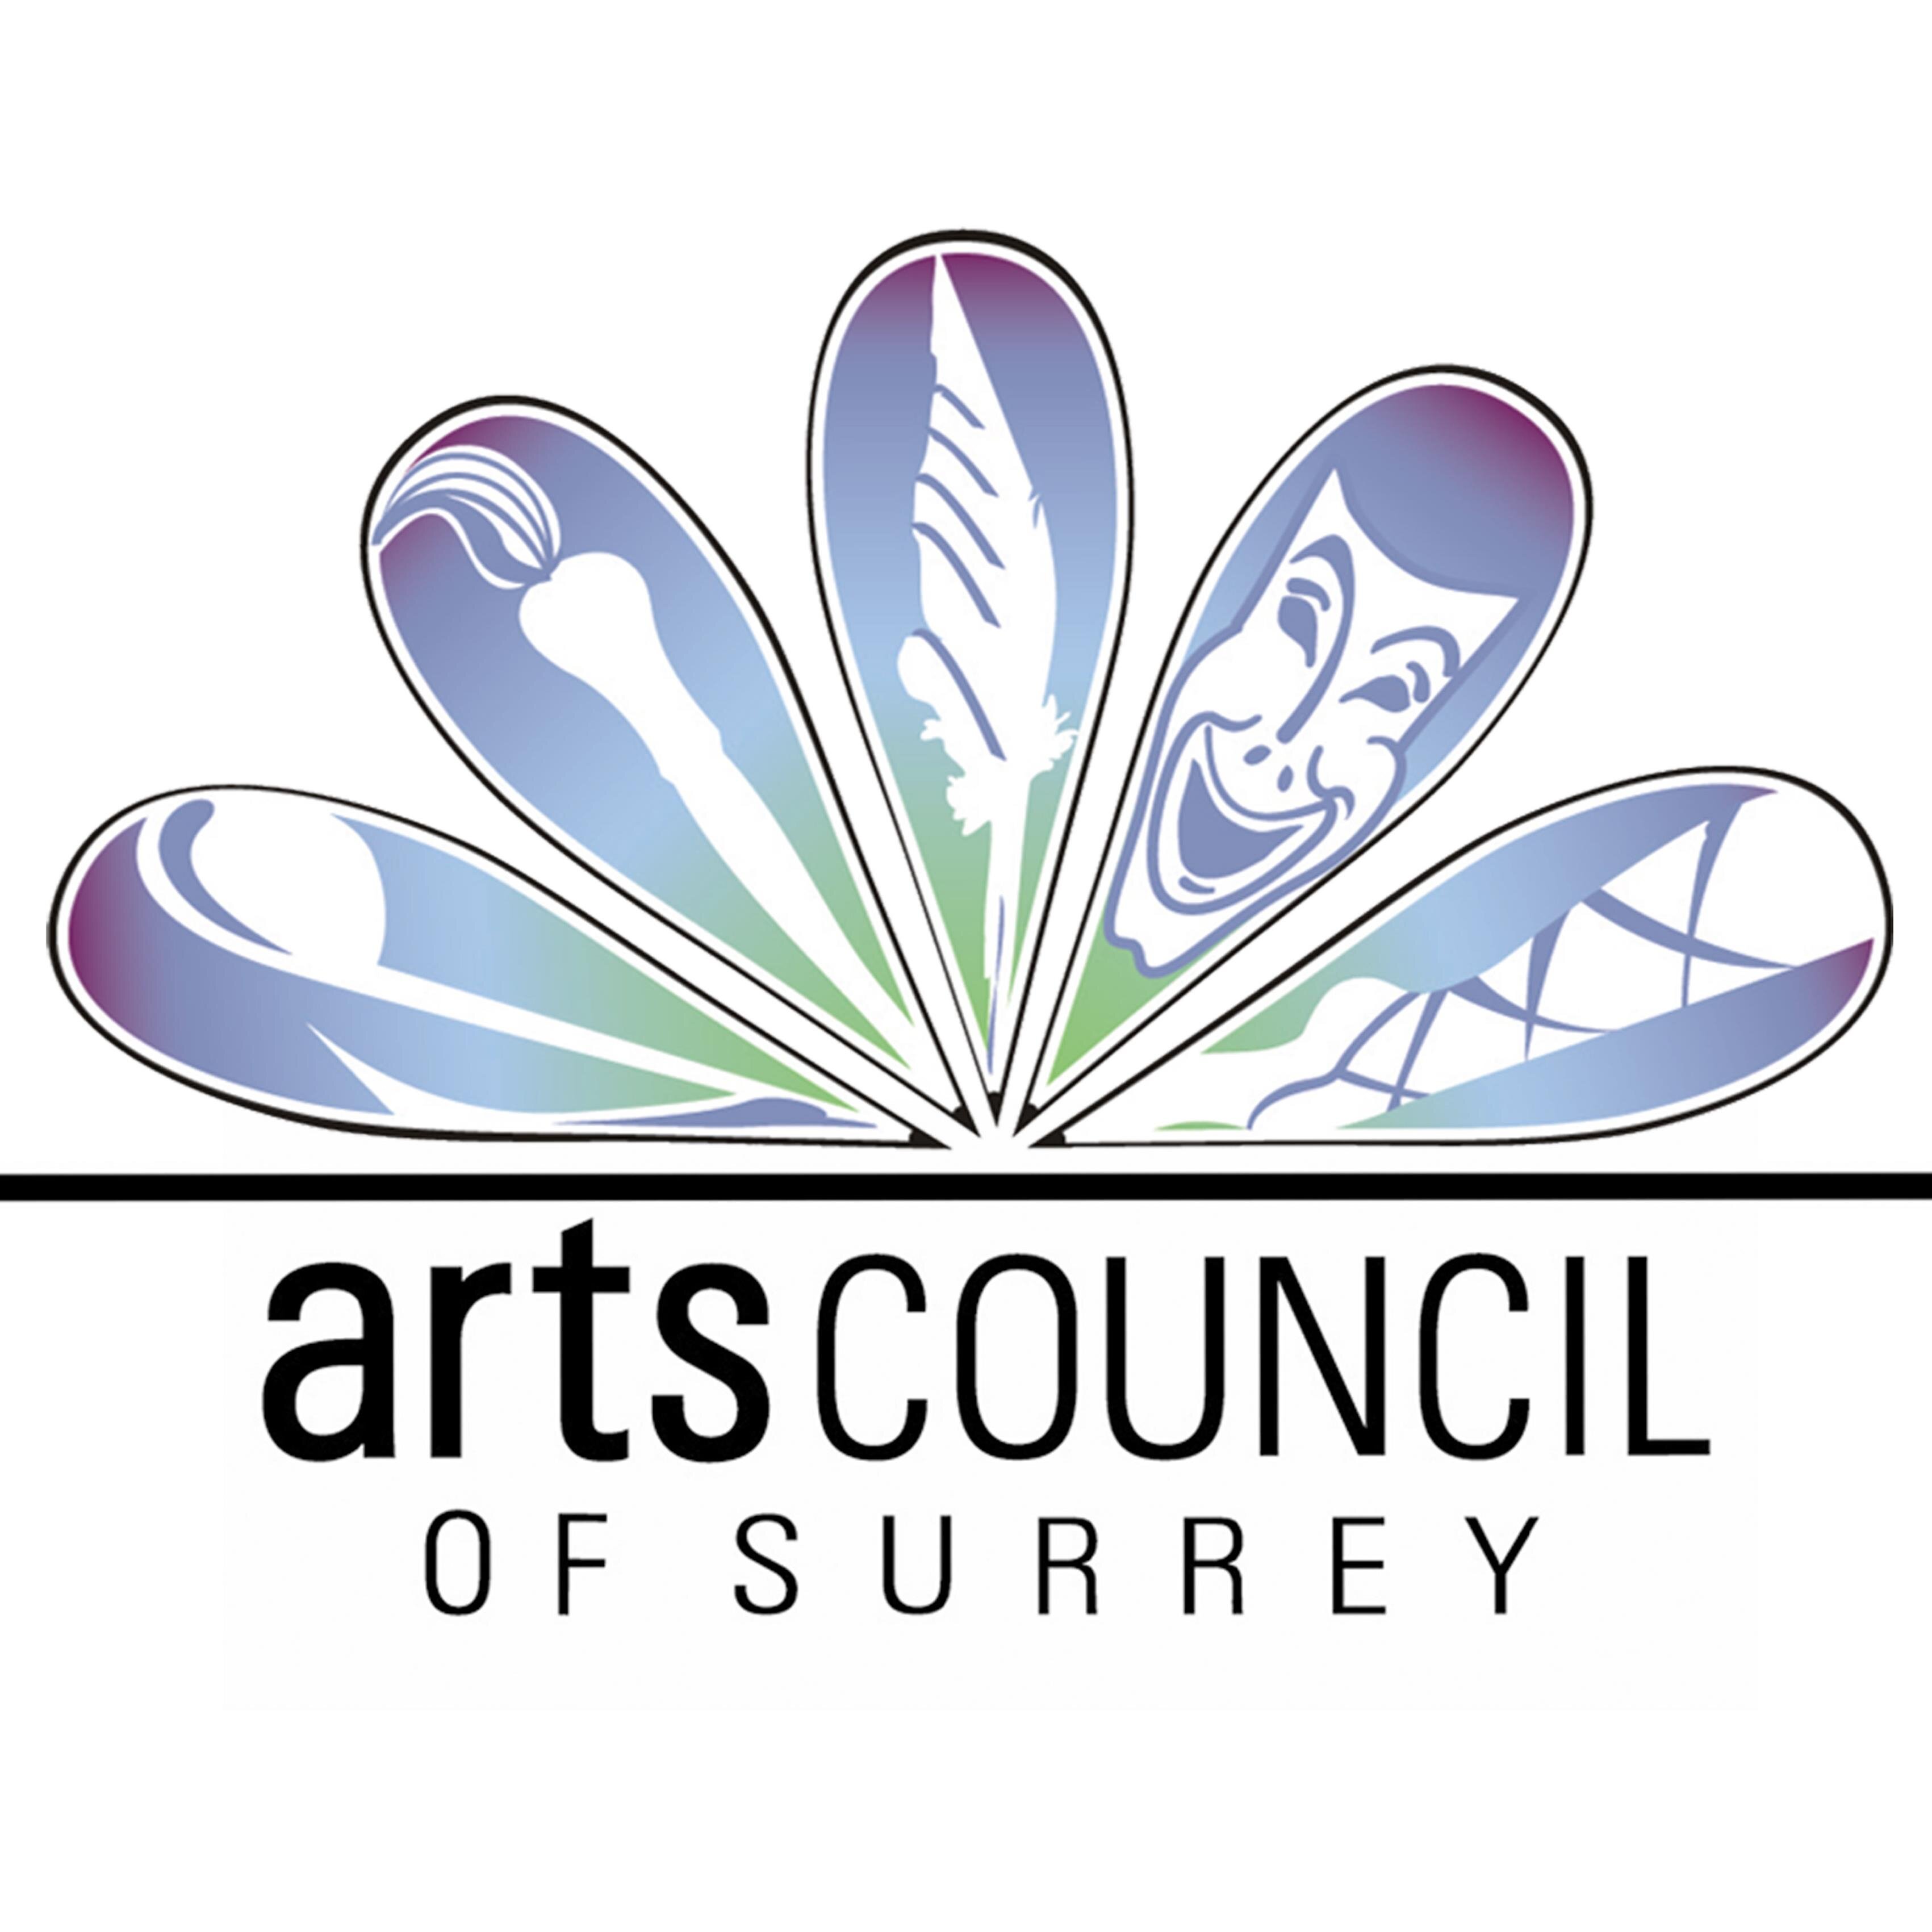 Promoting and fostering arts in #surreyBC @CityofSurrey - HQ @NCCforArts [Newton Cultural Centre]13530-72 Ave 604-594-2700